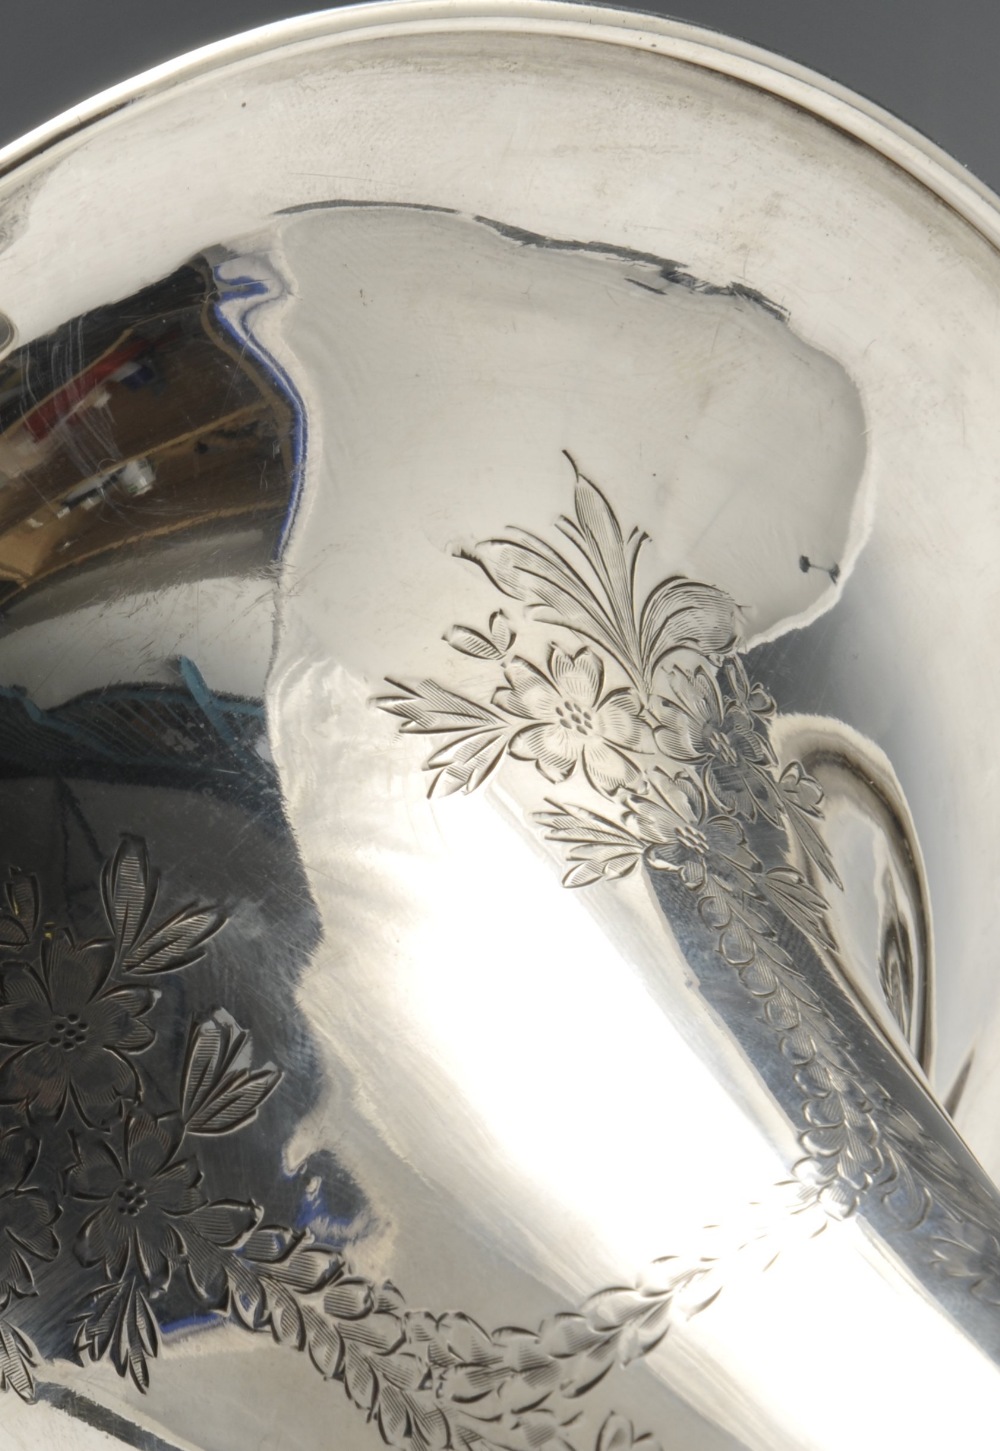 A pair of Tiffany & Co. silver vases, the tapering bodies with floral garland engraving and monogram - Image 4 of 5